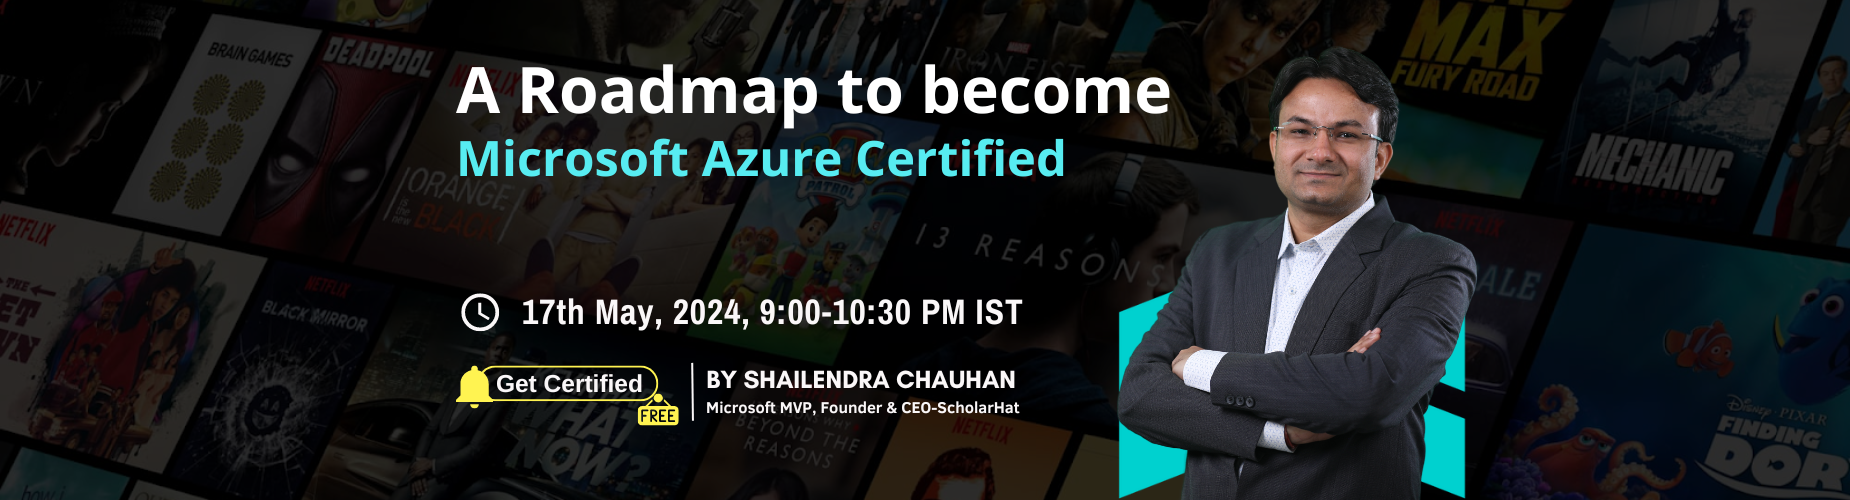 A Roadmap to Become Microsoft Azure Certified